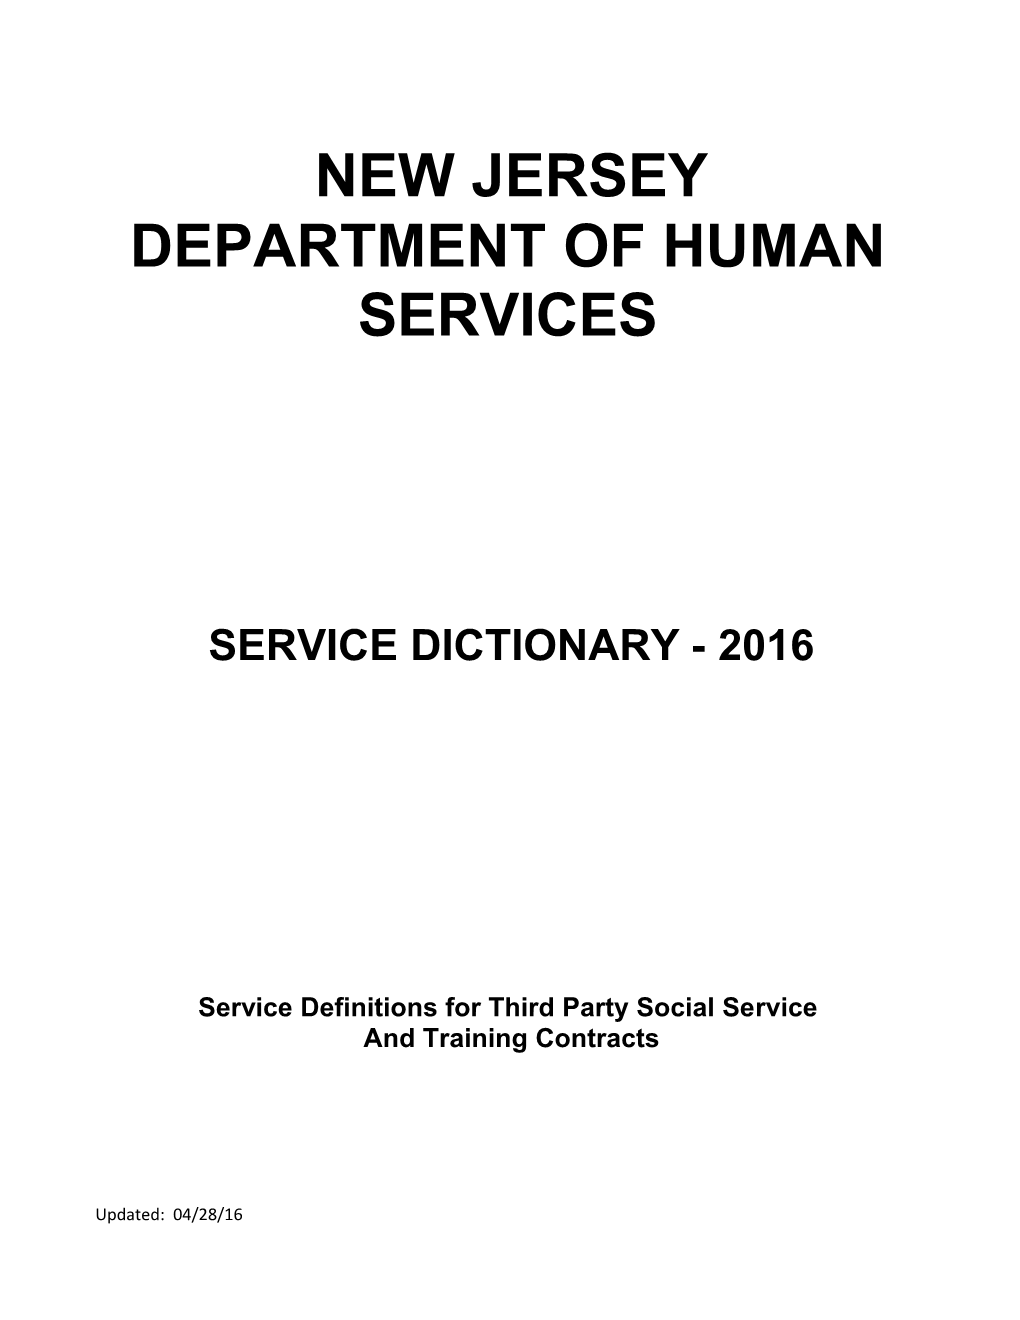 2016 DHS Service Dictionary 12.5.16